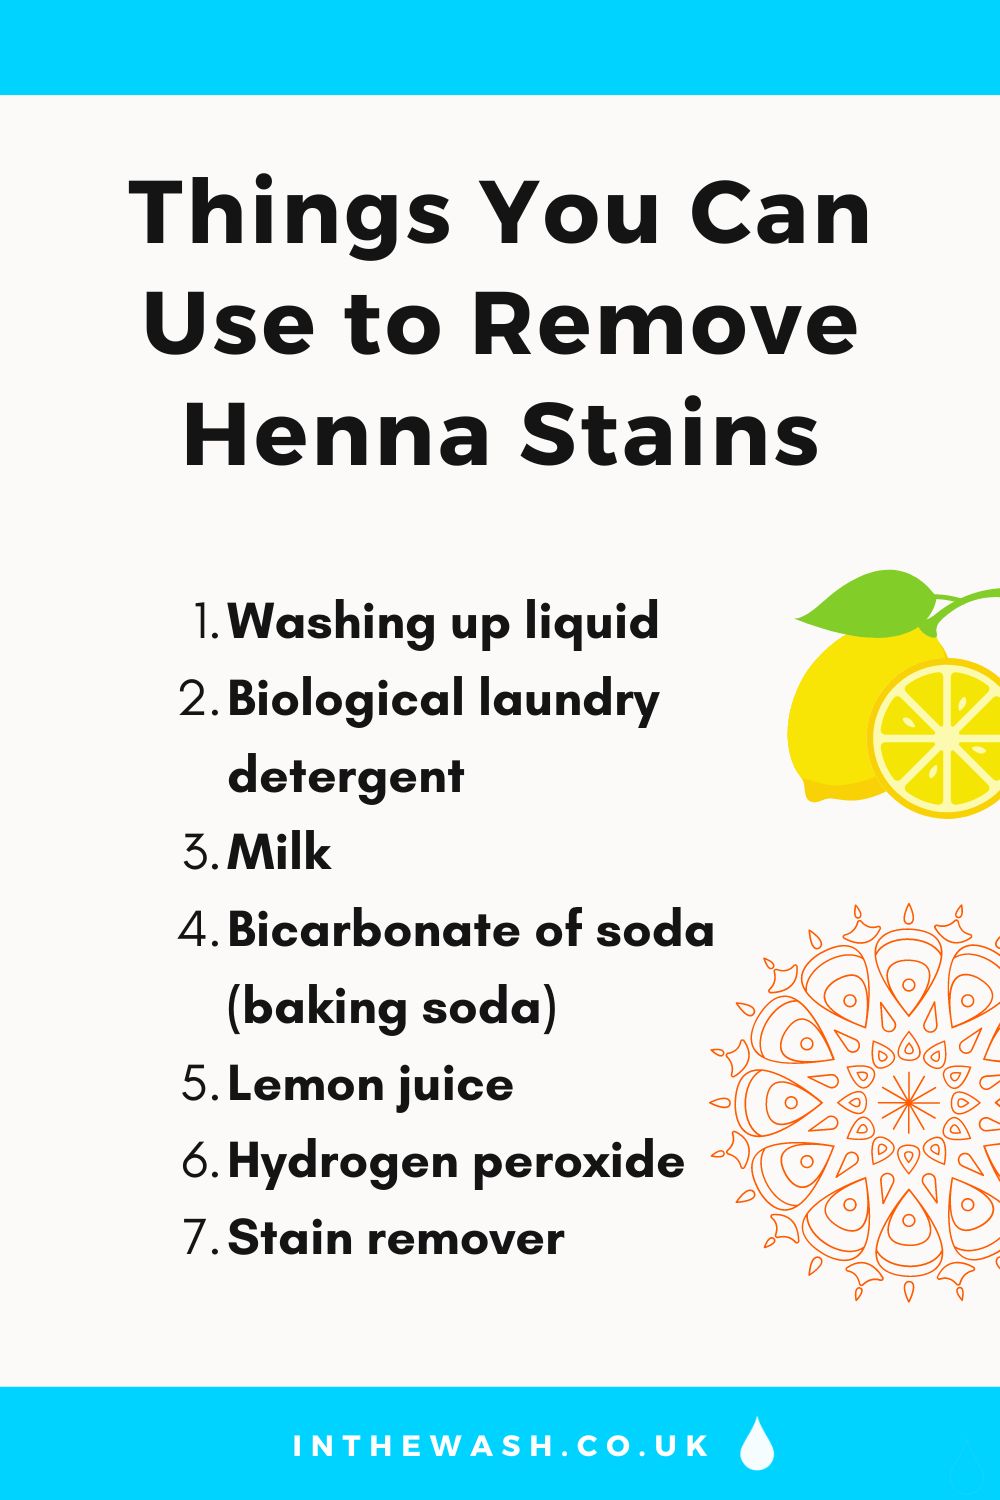 Things you can use to remove henna stains